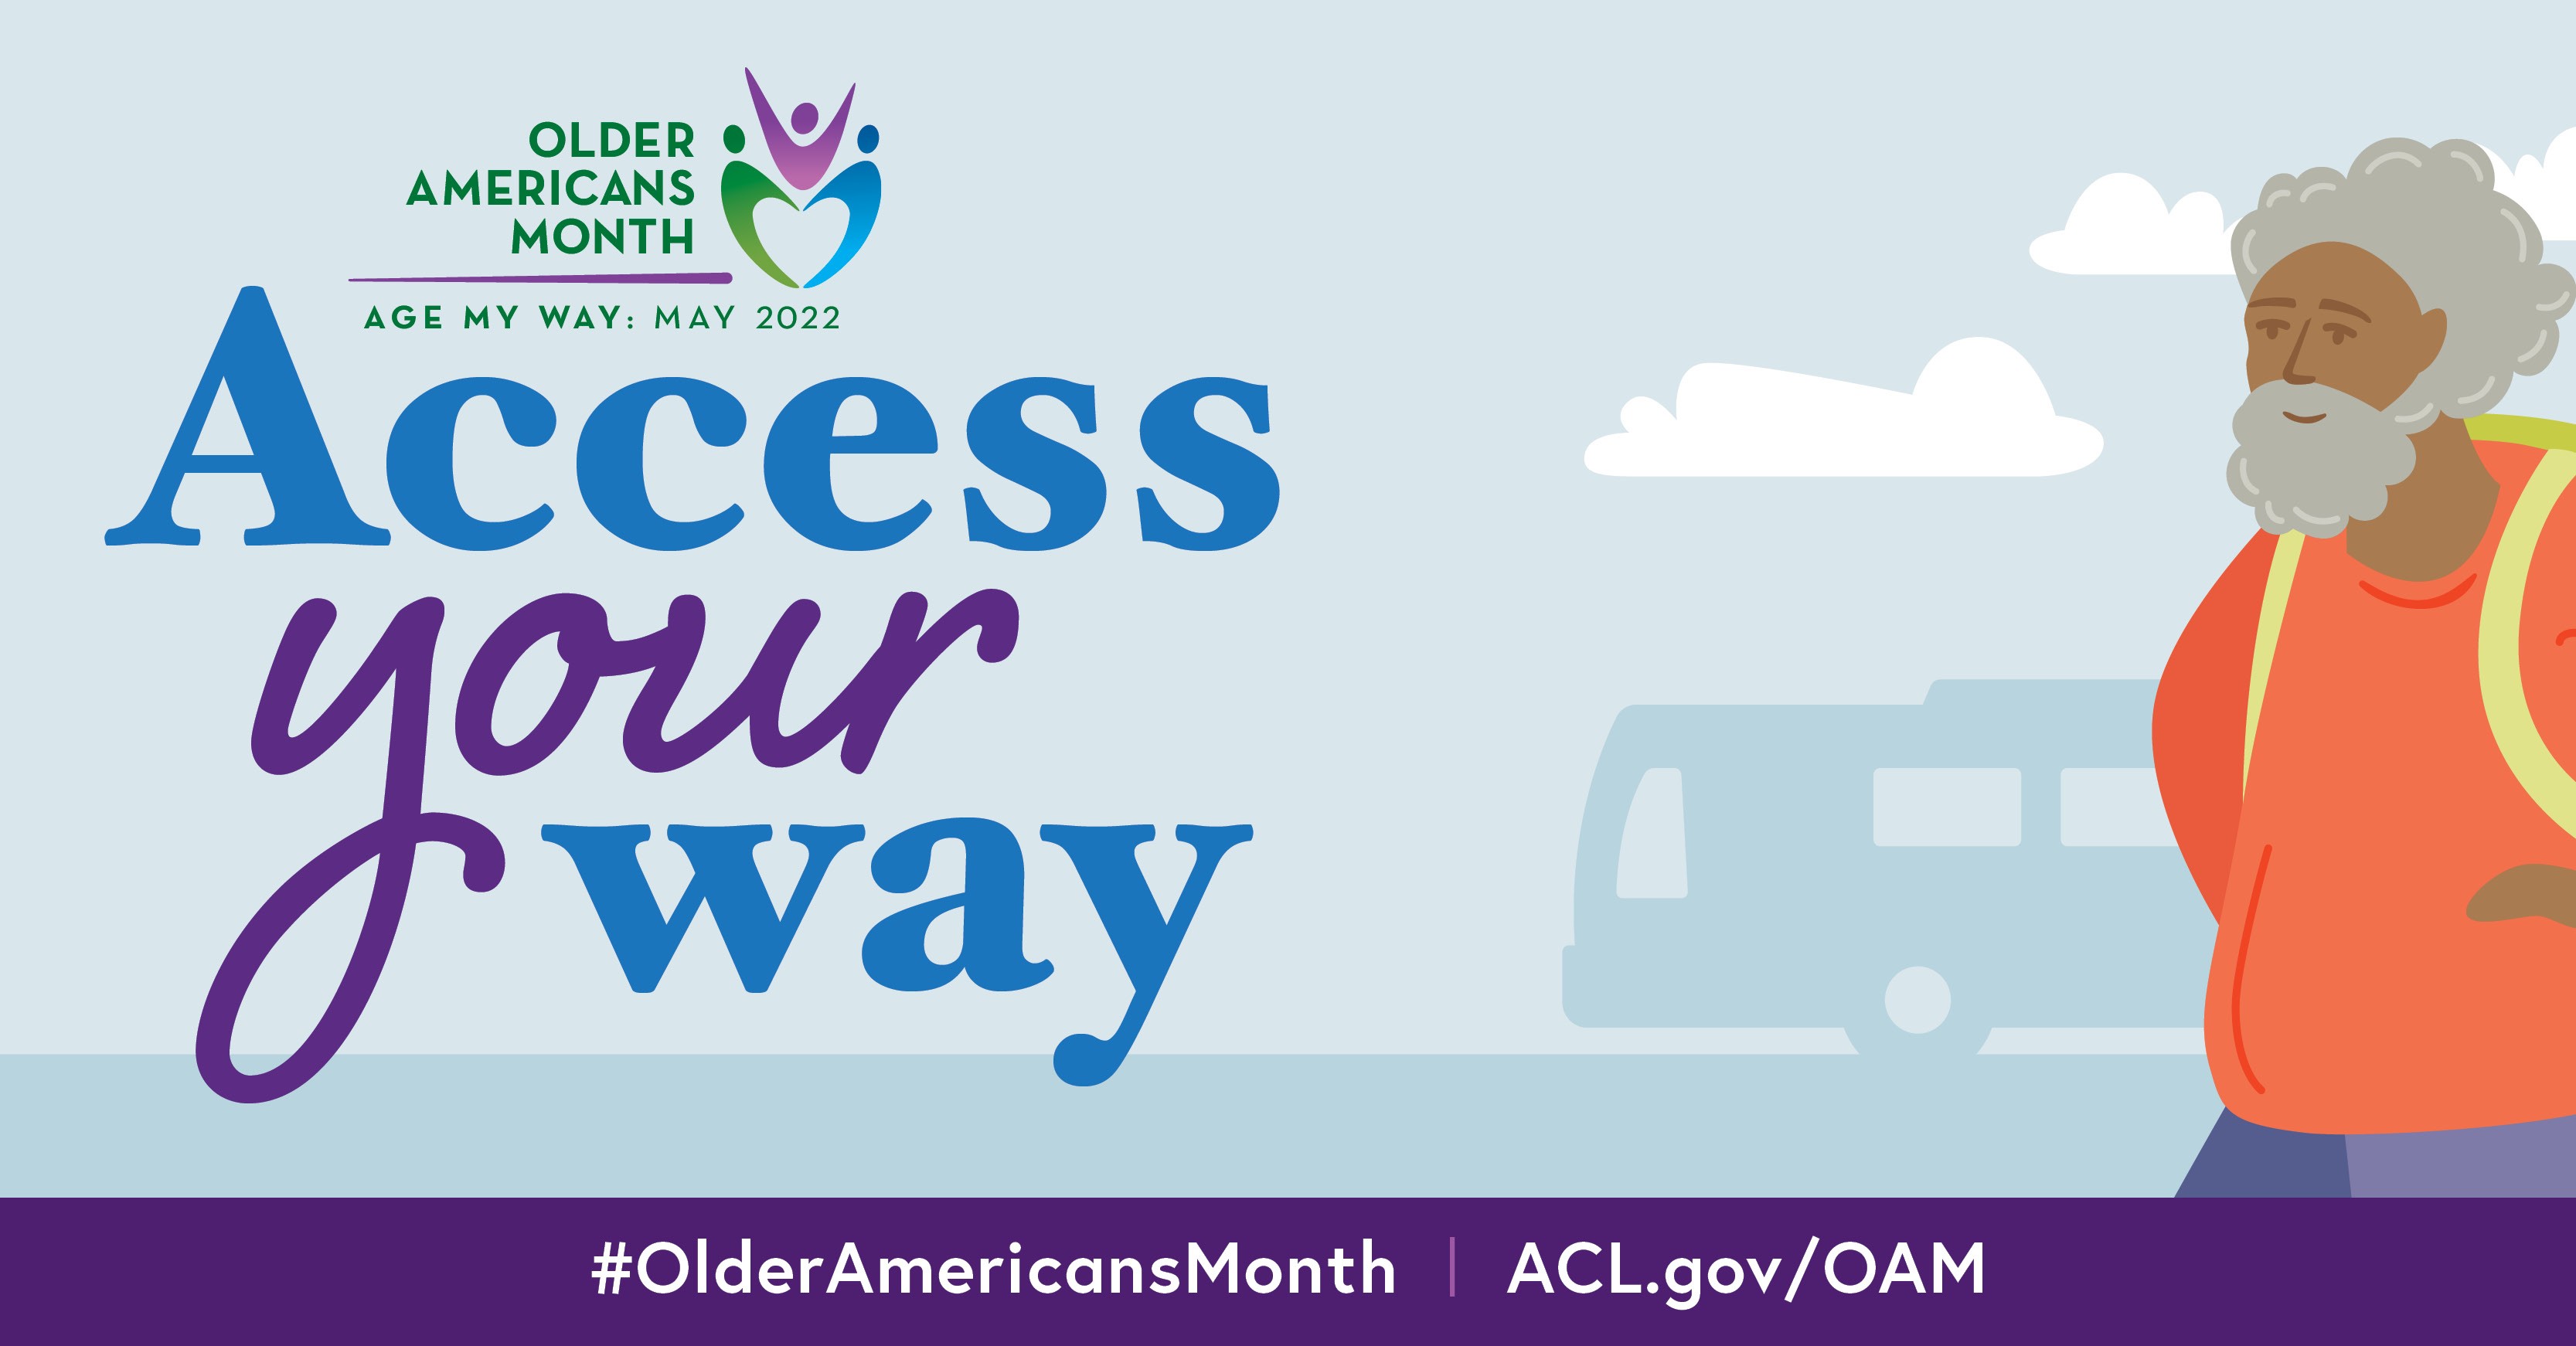 Older Americans Month, Age My Way: May 2022. Access your way. #OlderAmericansMonth ACL.gov/OAM